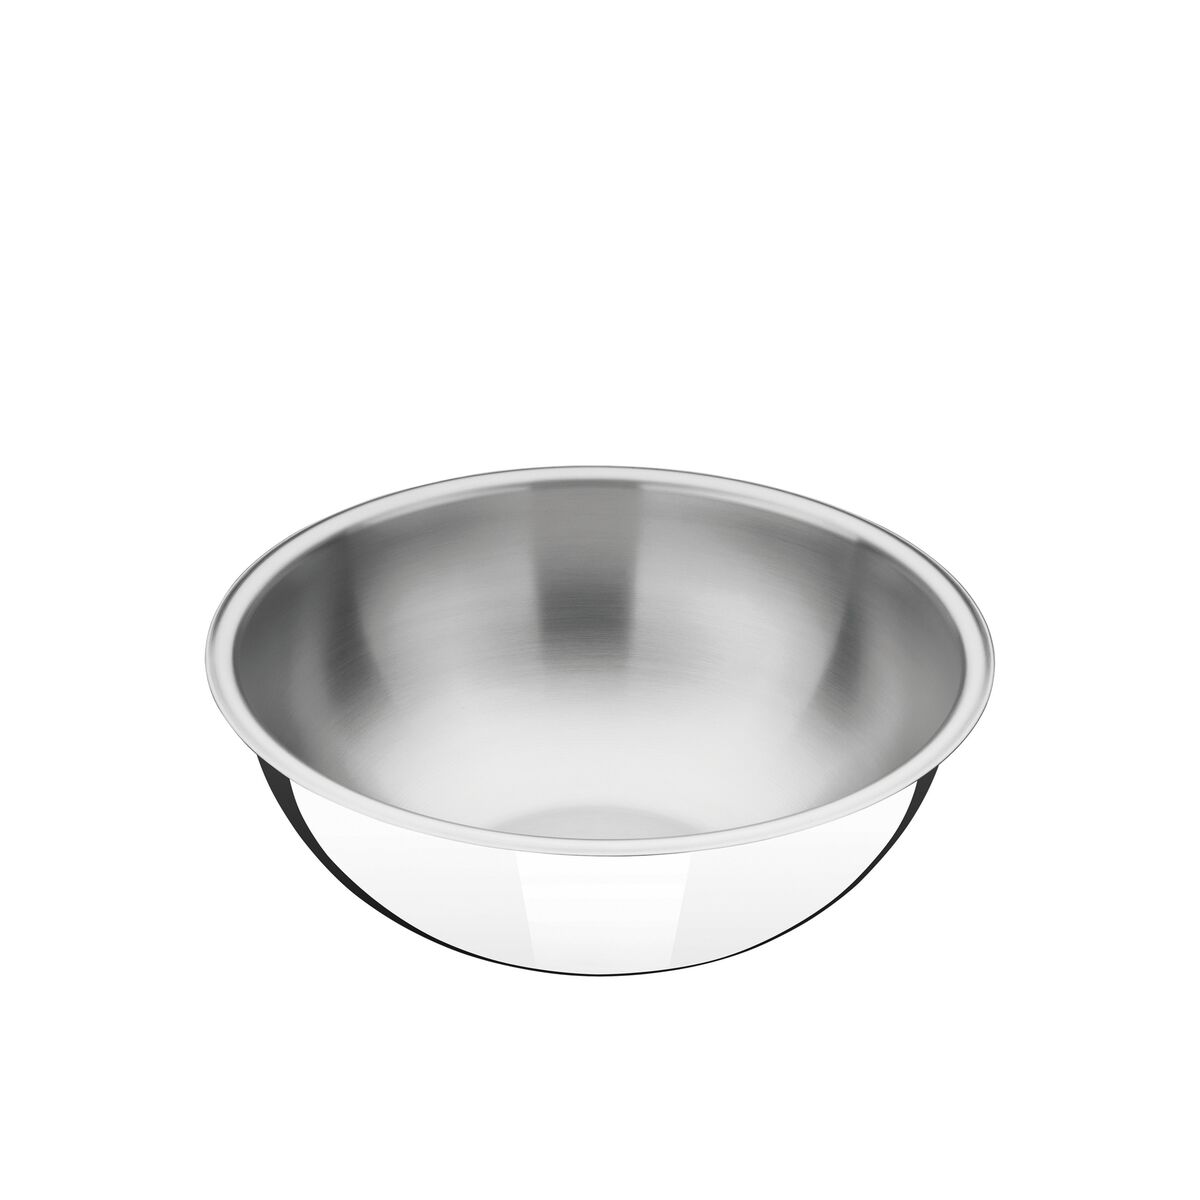 Tramontina Cucina stainless steel bowl, 28 cm and 4,7 L